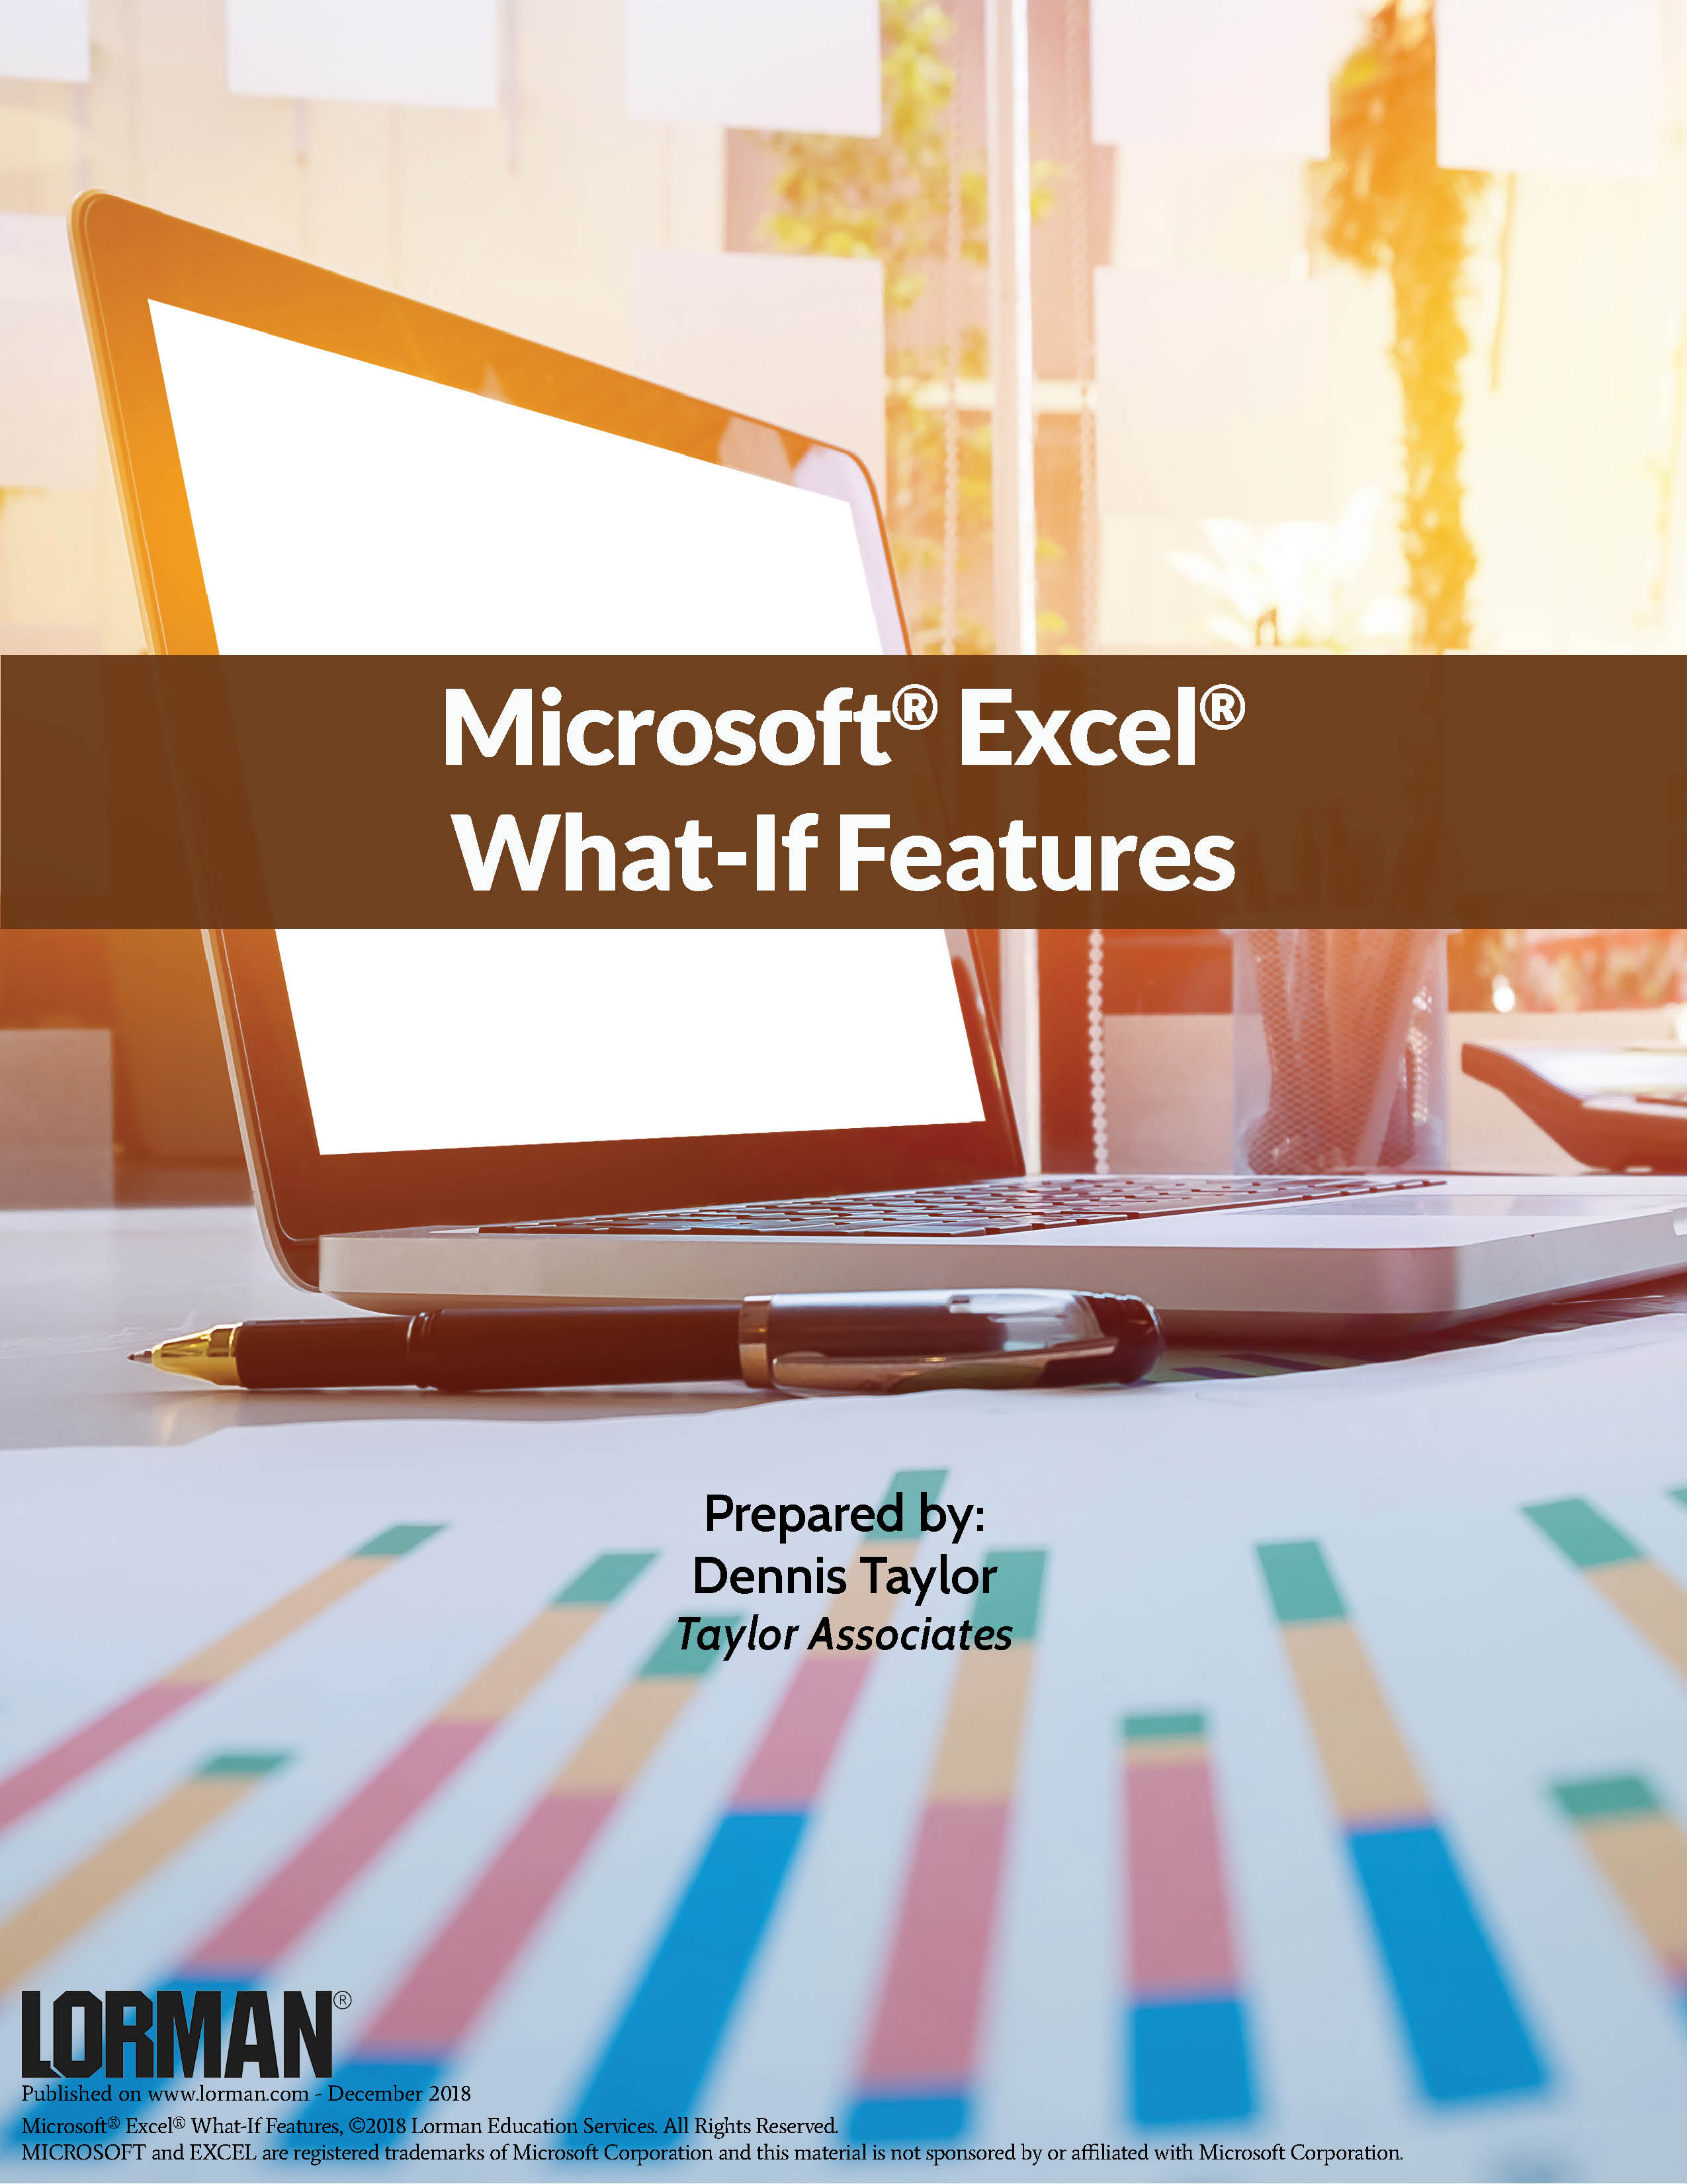 What-If Features in Microsoft® Excel®